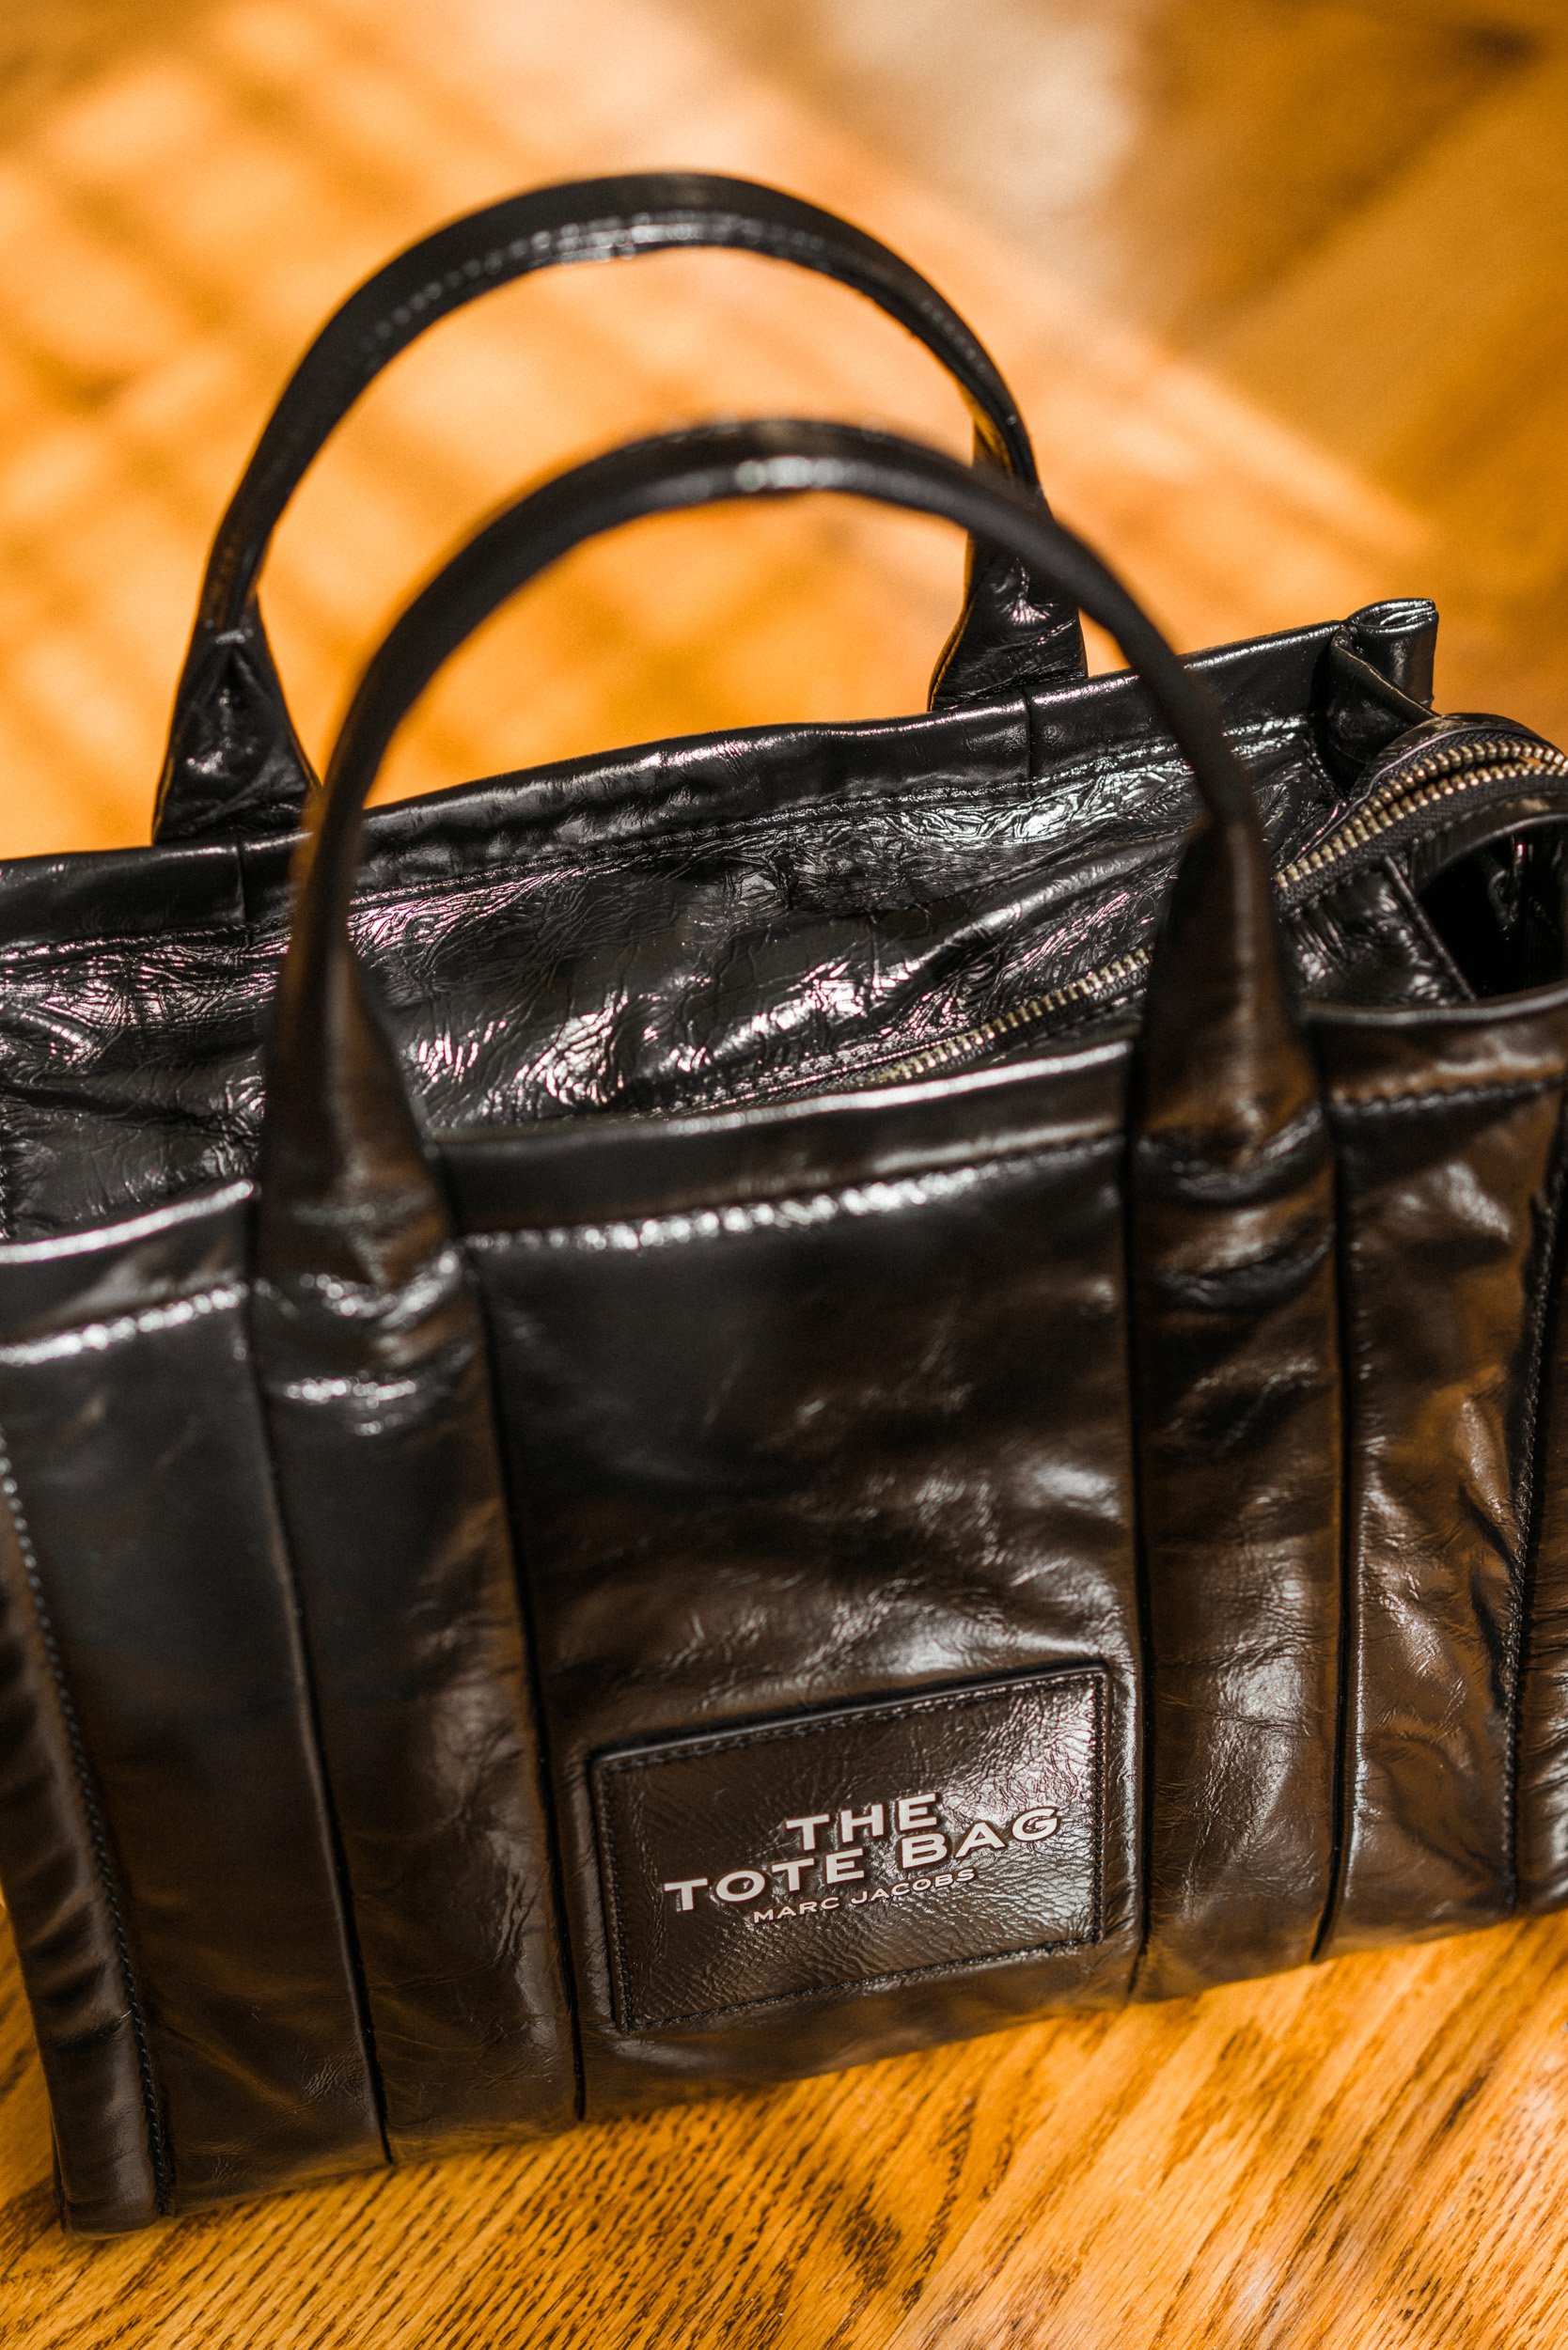 First impression of Marc Jacobs small leather tote